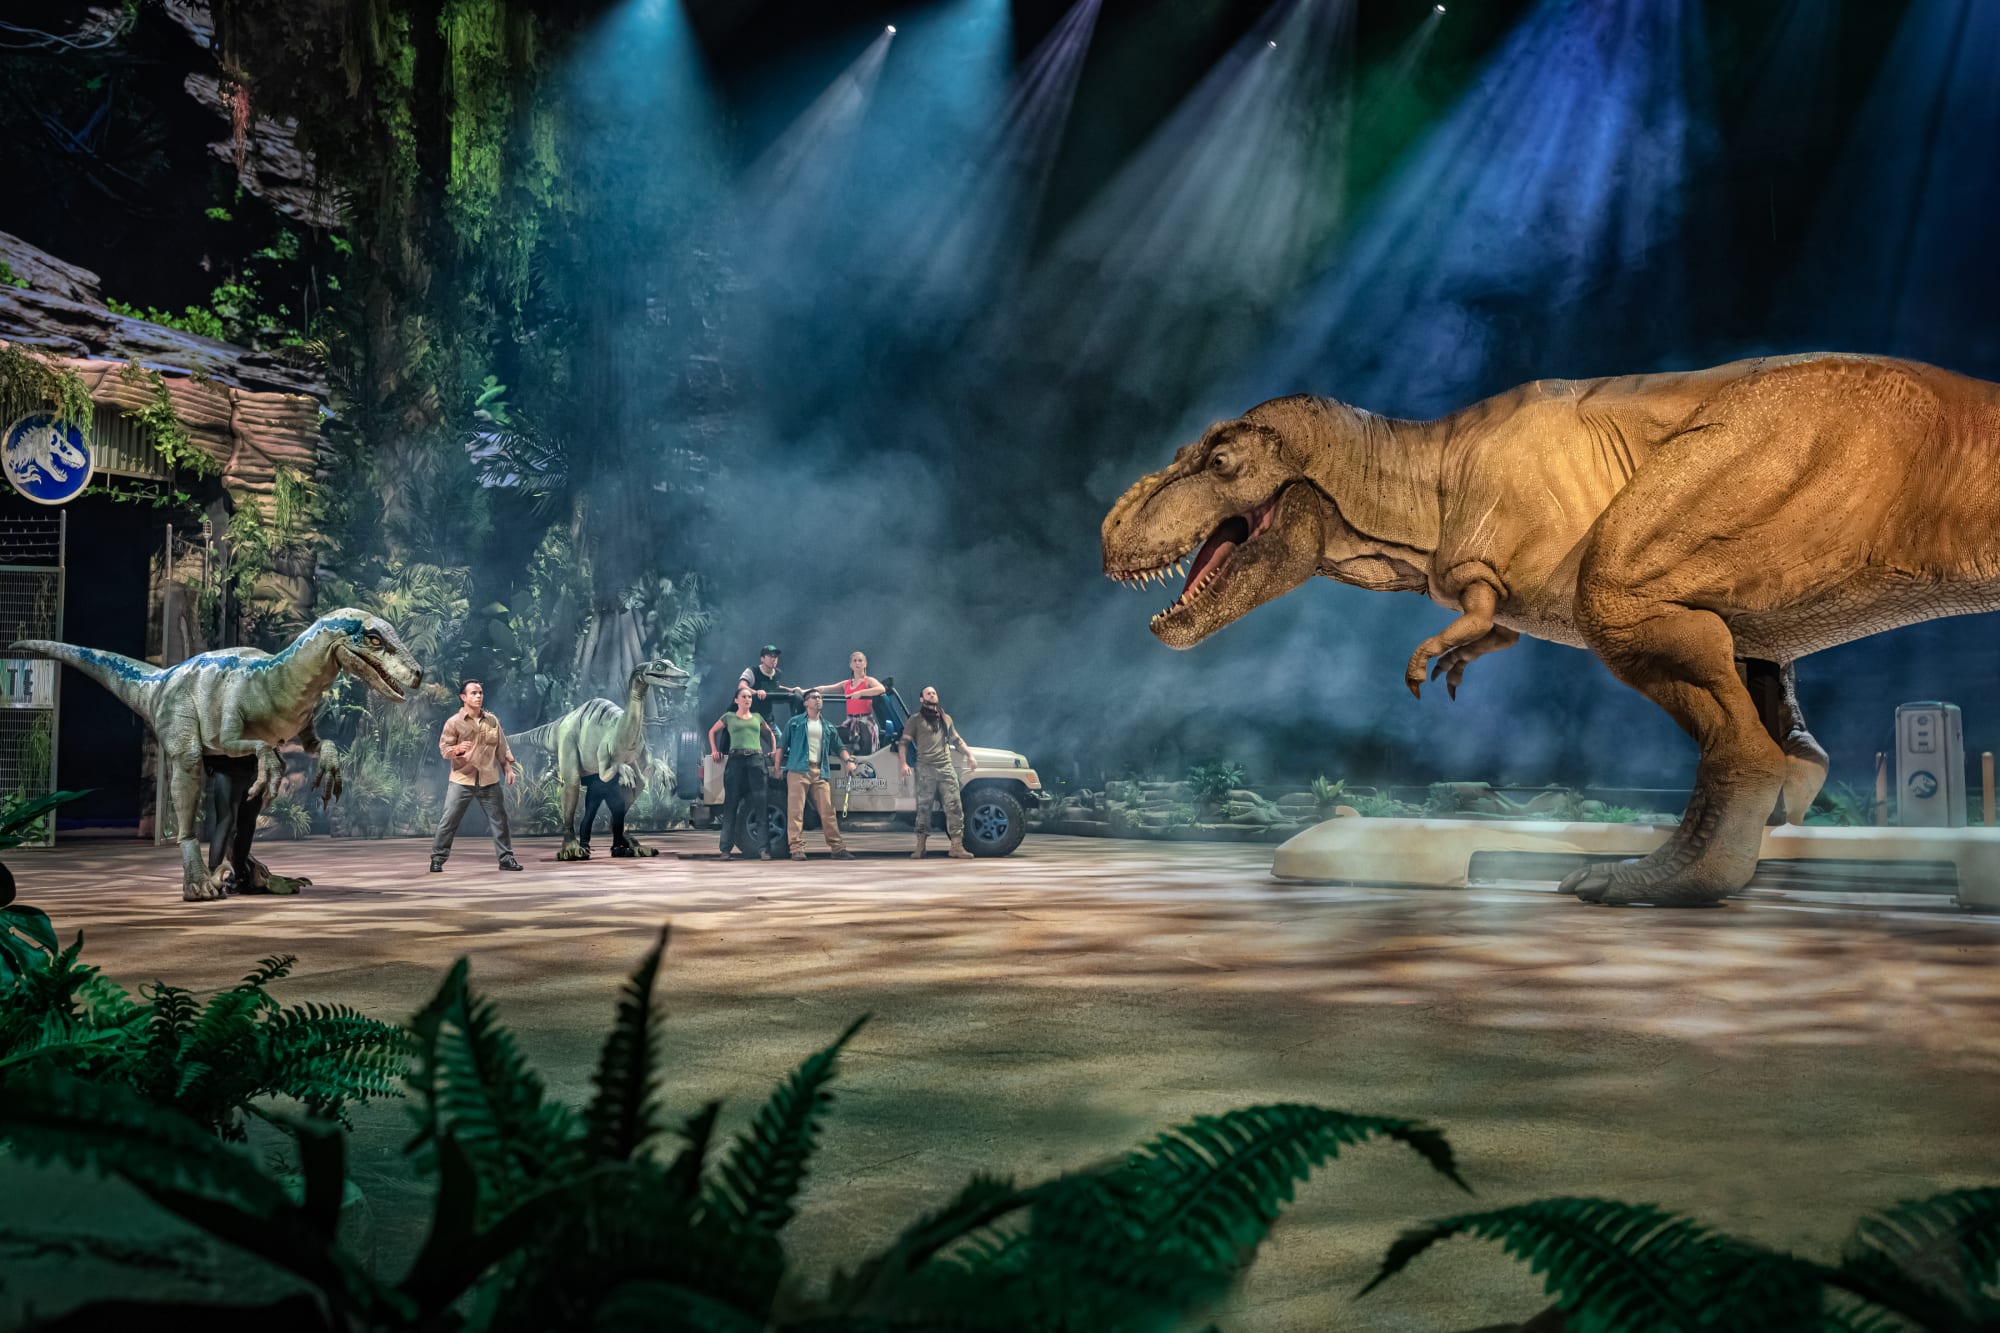 jurassic world live tour 2023 what is it